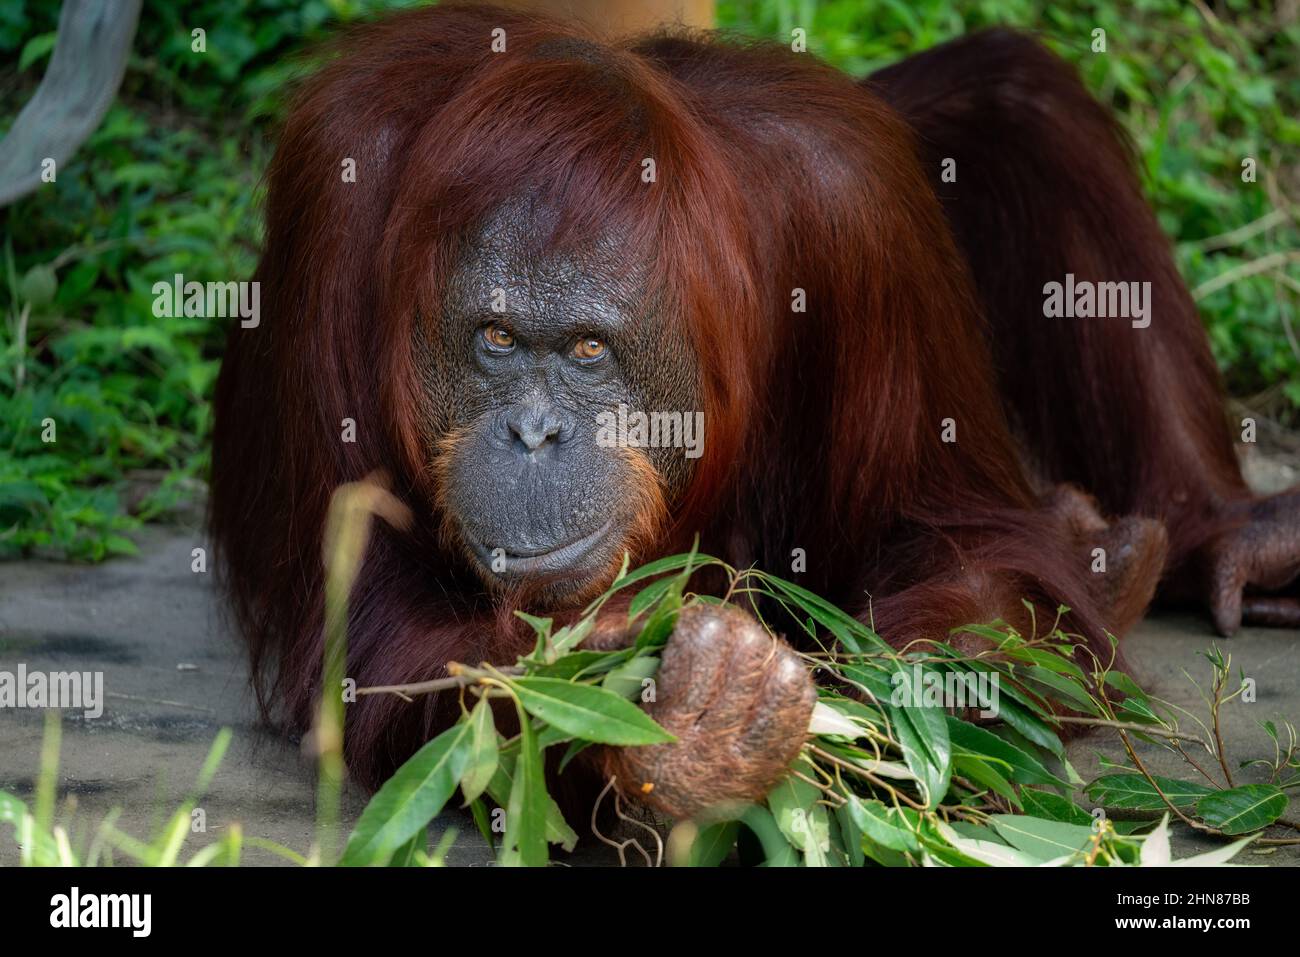 Orangutan holding a green plant in its hand in its enclosure and looking at the camera at the zoo Stock Photo